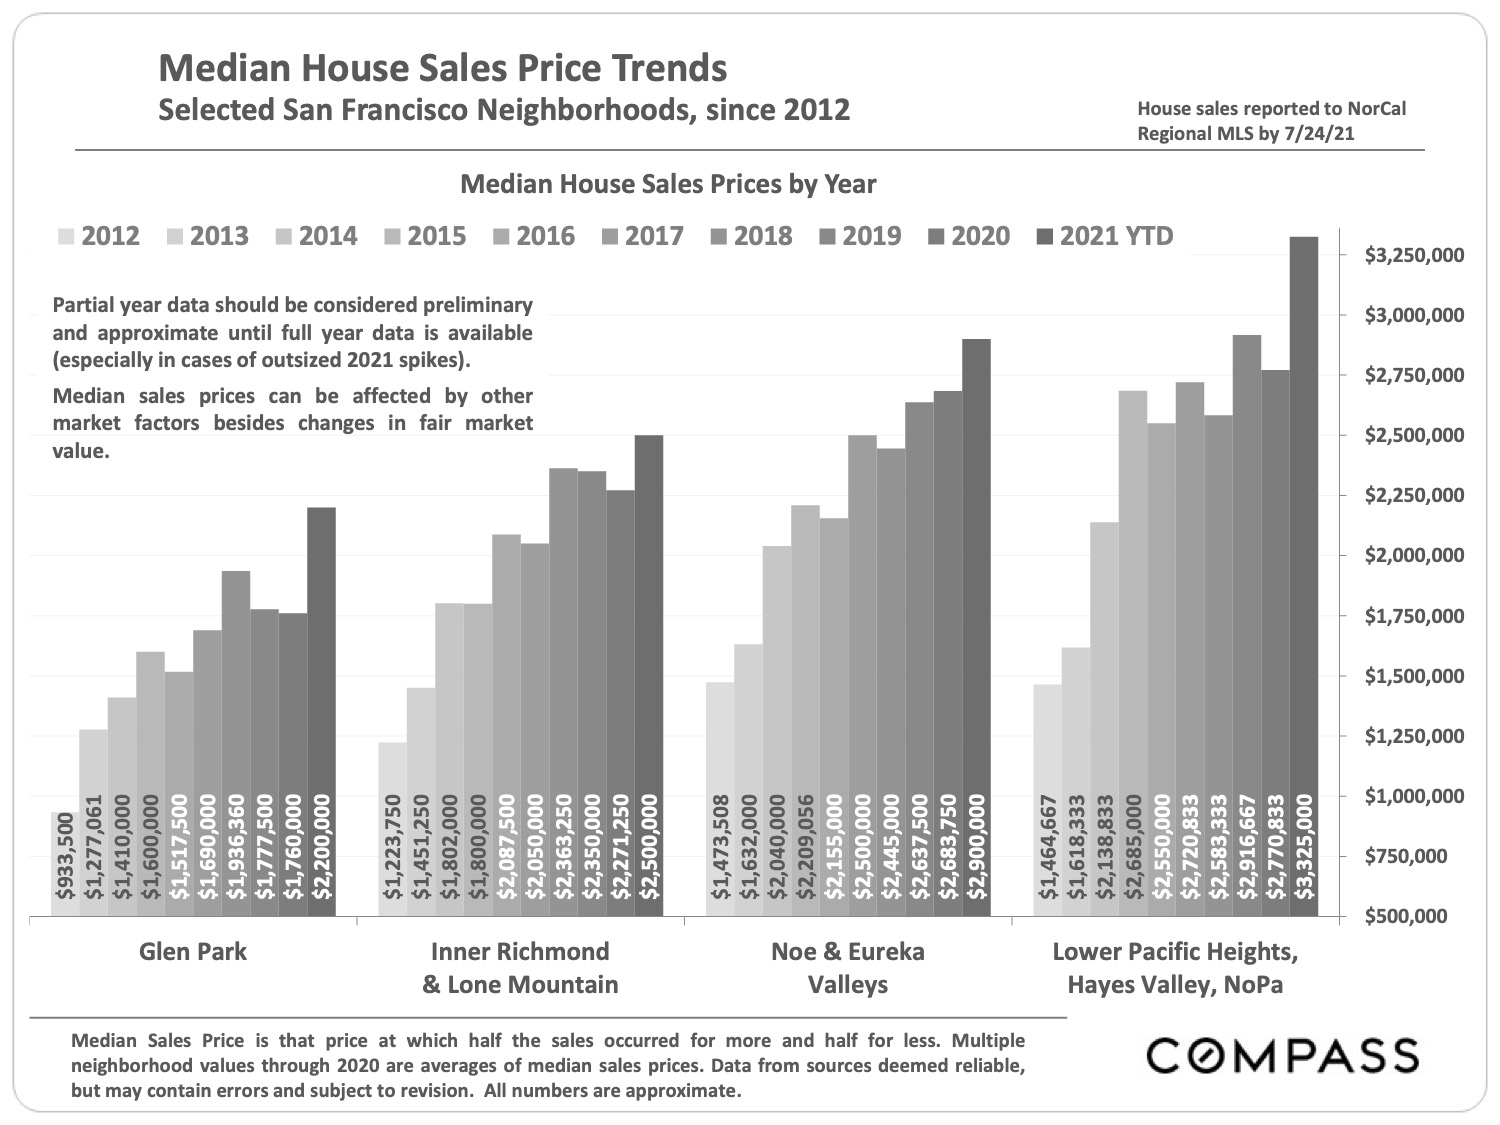 Image of Median House Sales Price Trends Selected San Francisco Neighborhoods since 2012